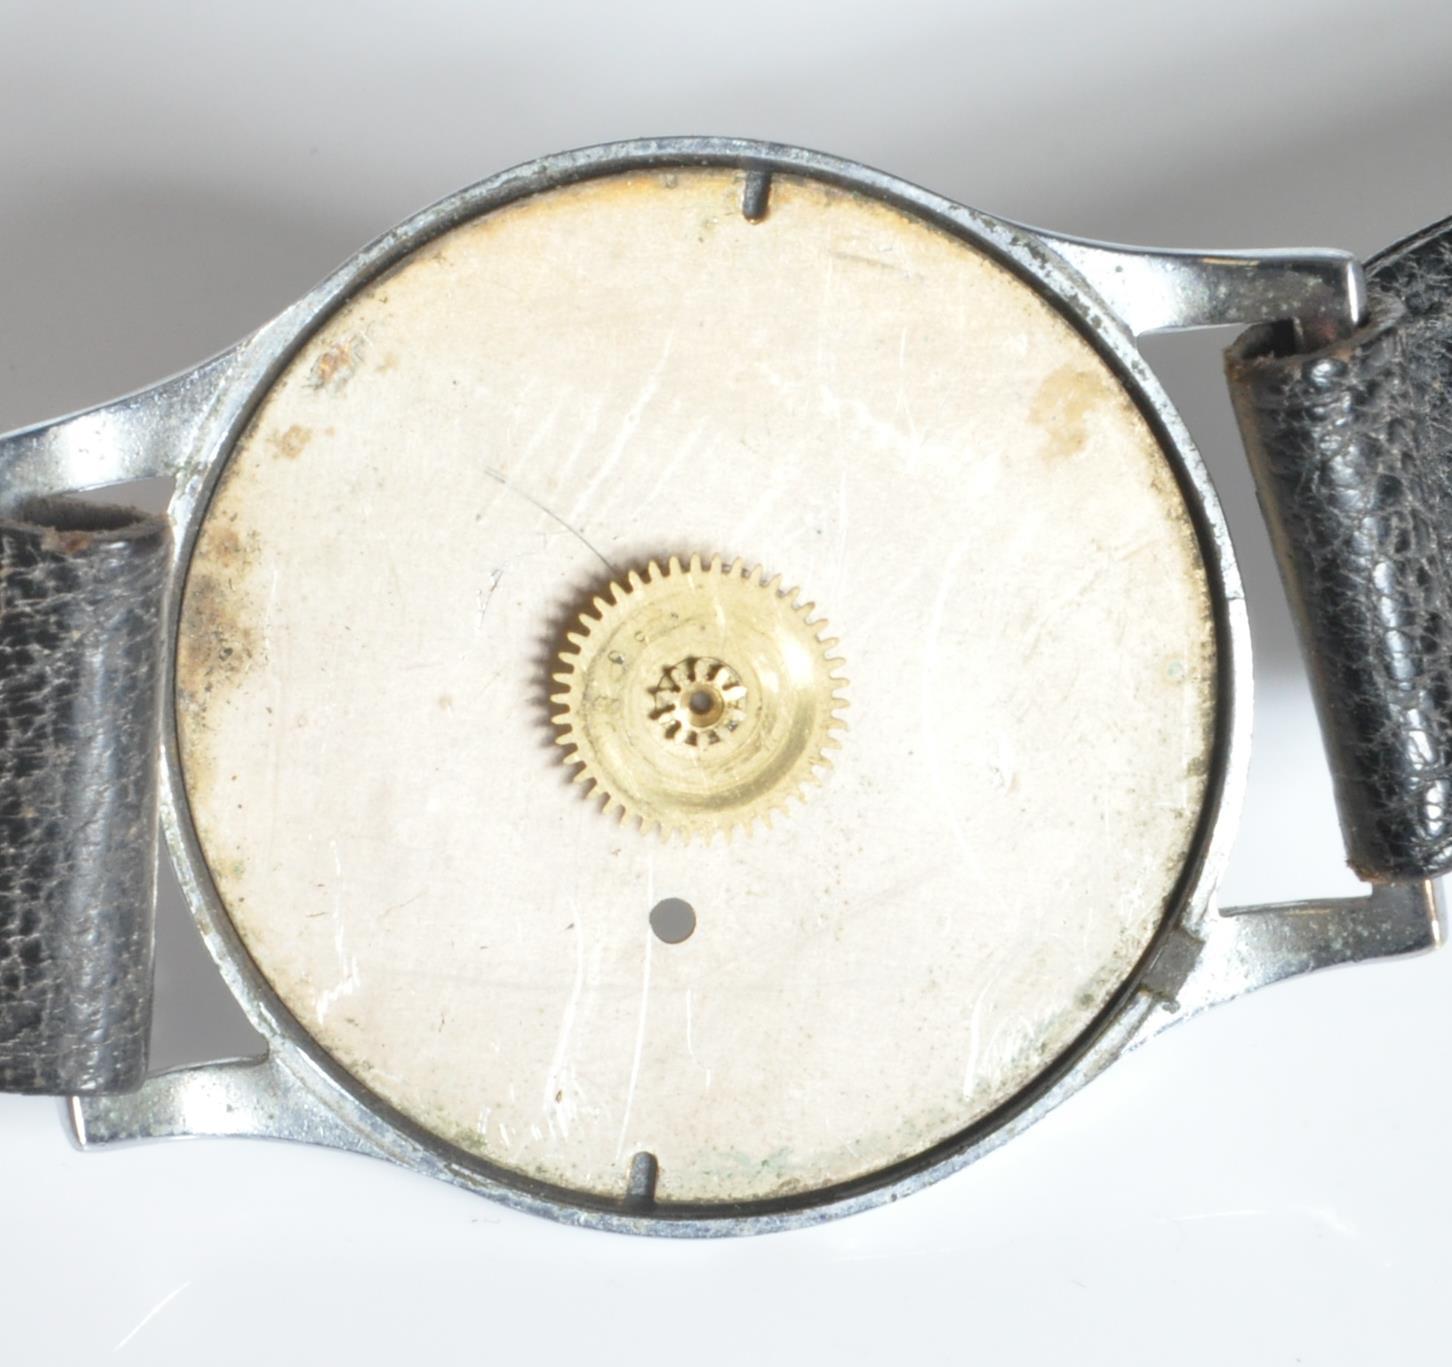 MID 20TH CENTURY SERVICES COLONIAL GENTLEMEN'S WRISTWATCH - Image 9 of 11